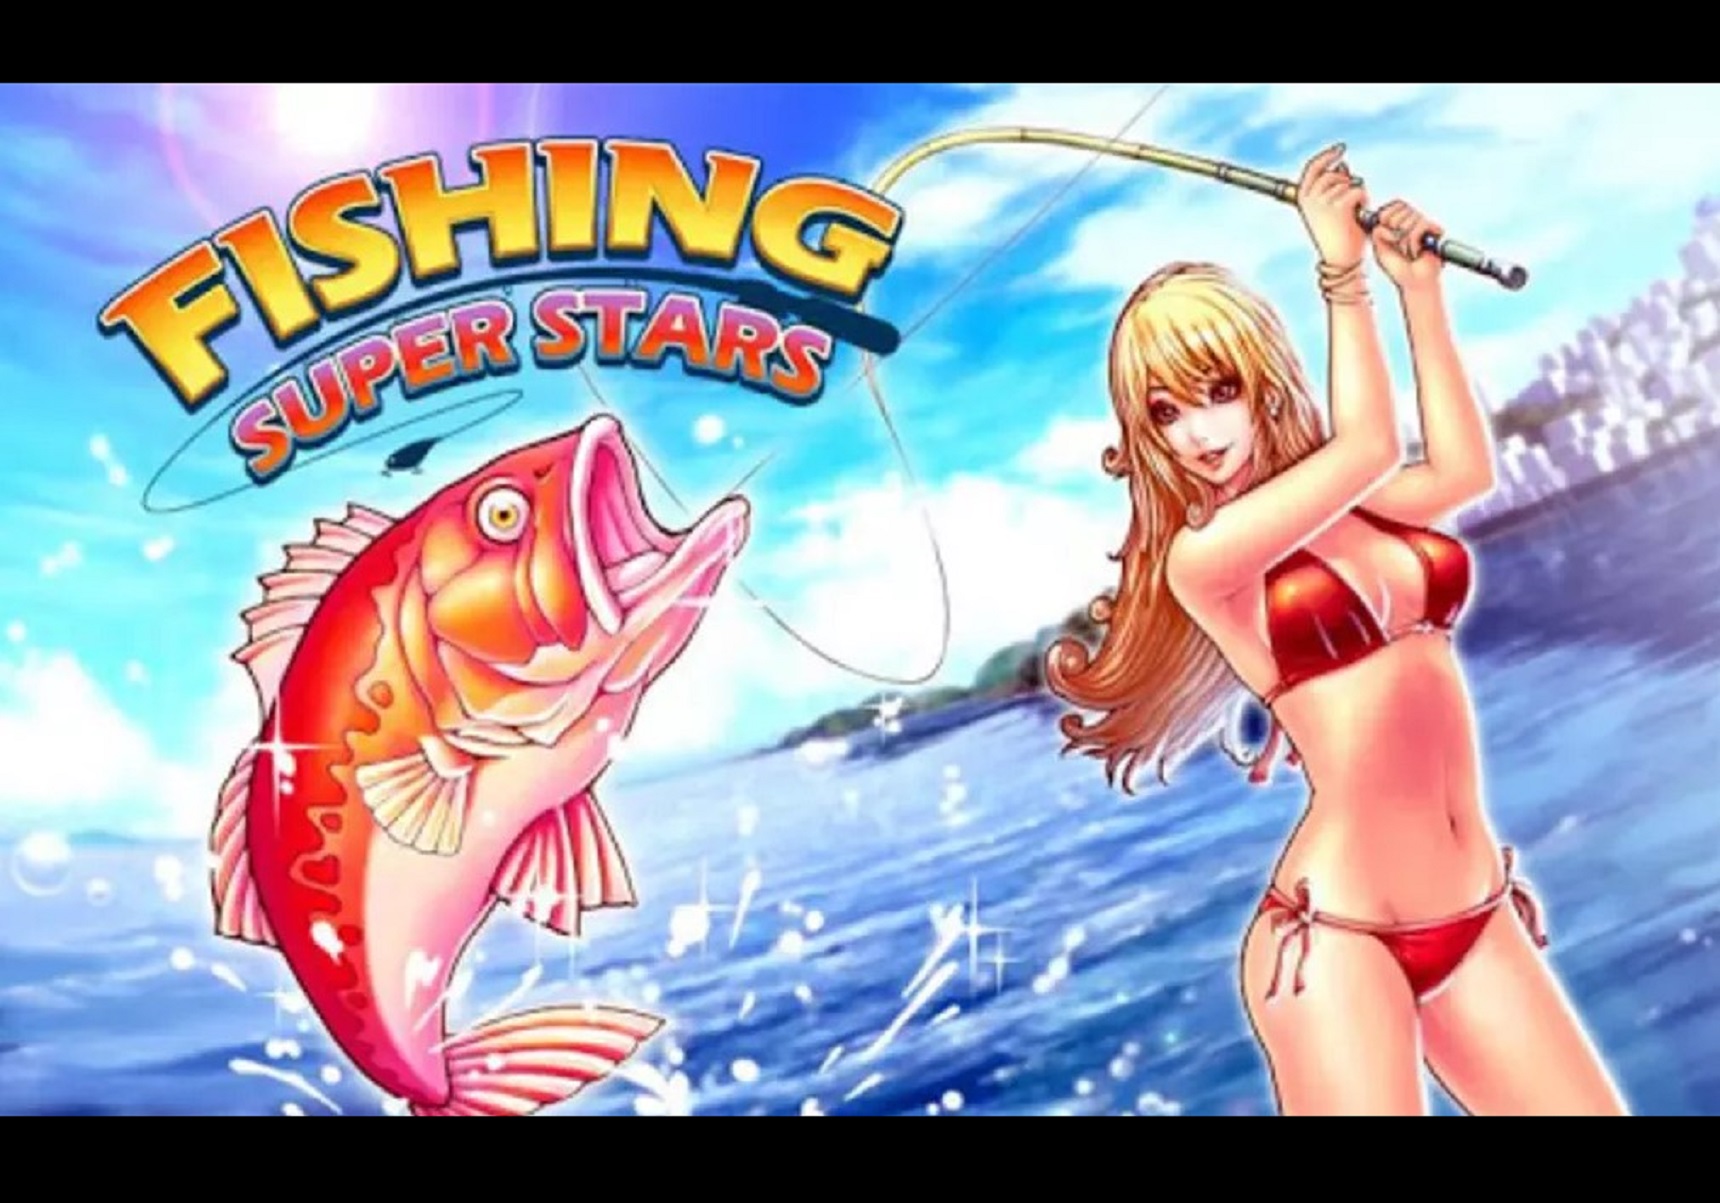 Download Fishing Superstars 5.9.56 (Full Feature) Apk